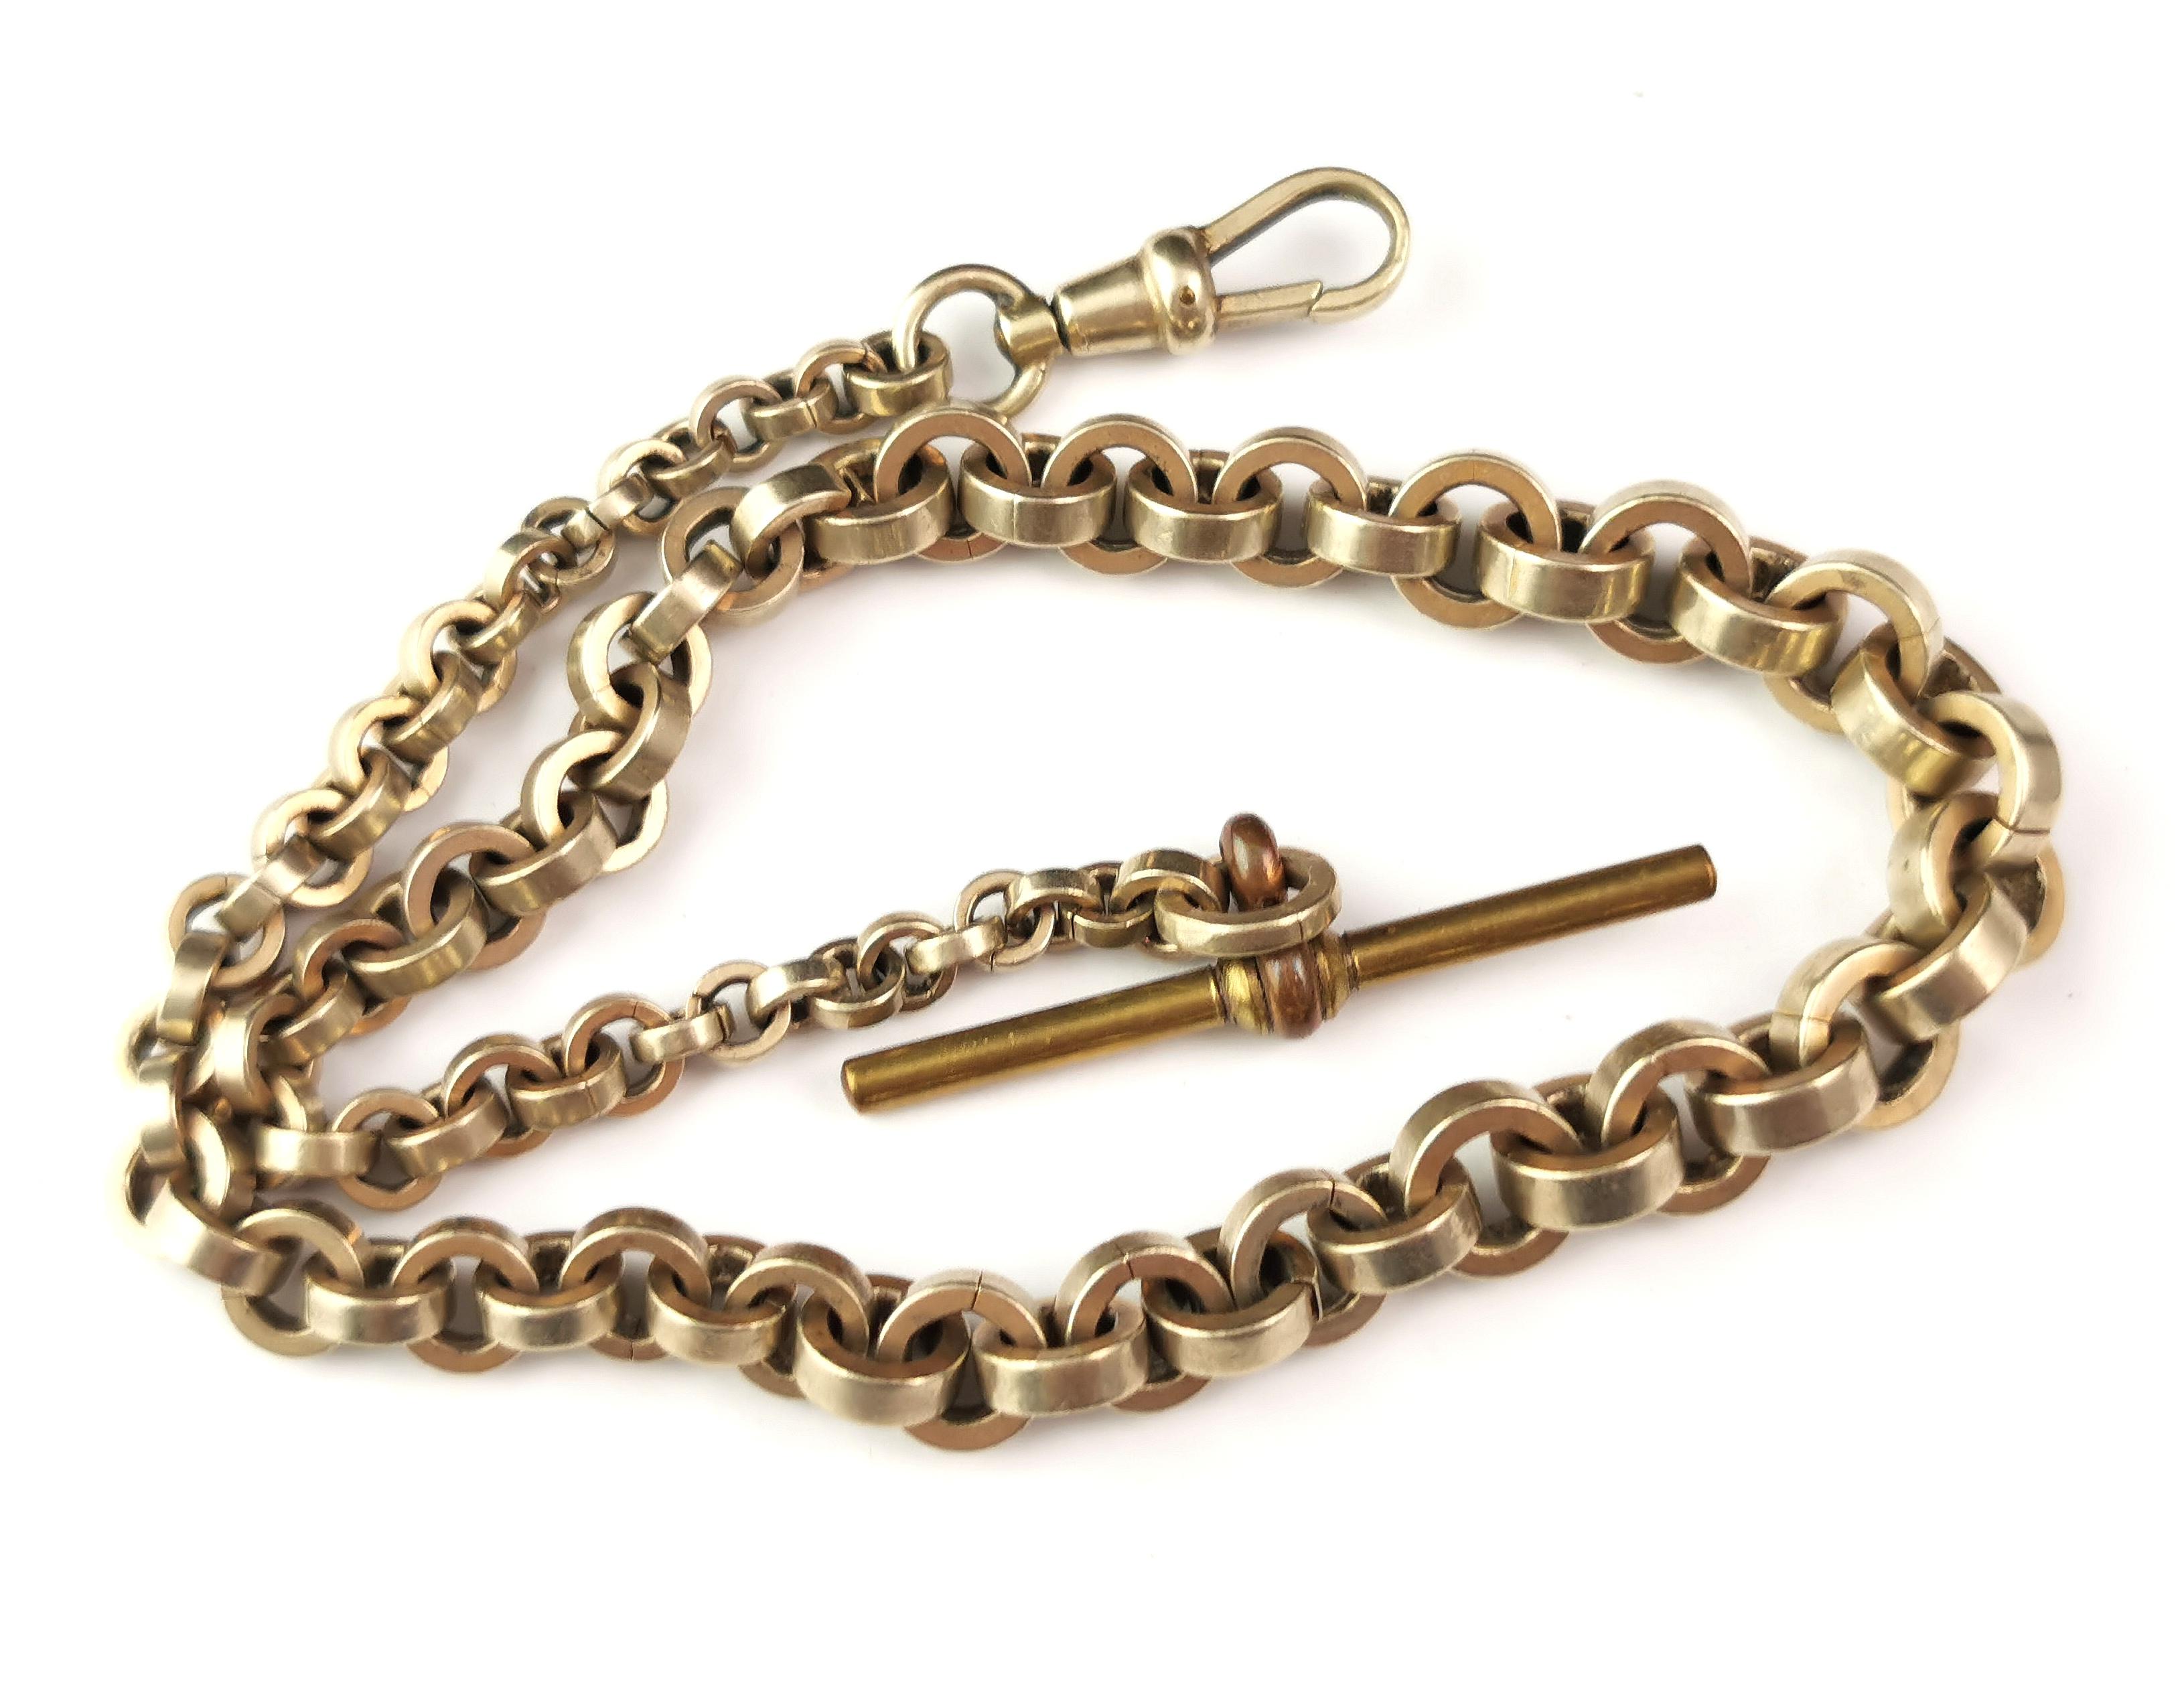 A handsome antique Victorian era gilt metal Albert chain.

An unusual chunky rolo link chain which is graduated and it has a dog clip fastener and a brass t bar.

It is a golden gilt wash over white metal and is a nice solid piece.

Perfect for